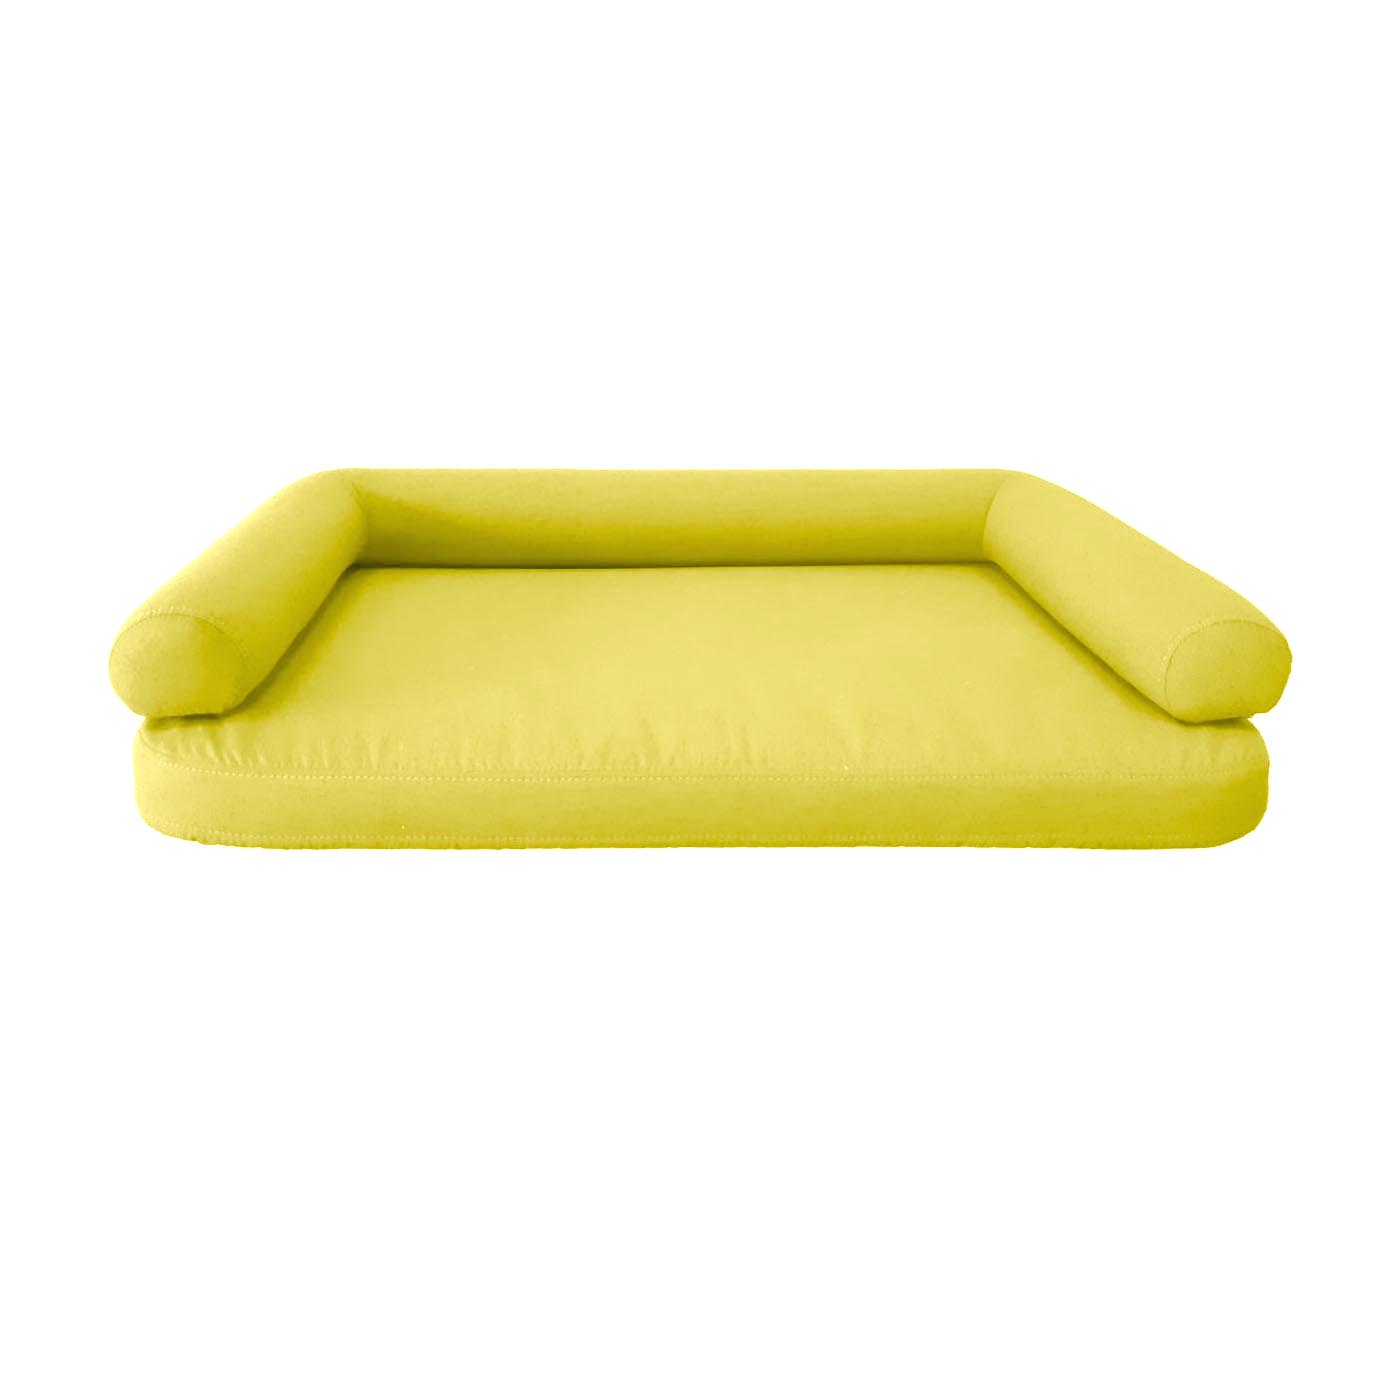 The Lime Pohovka Pet Bed